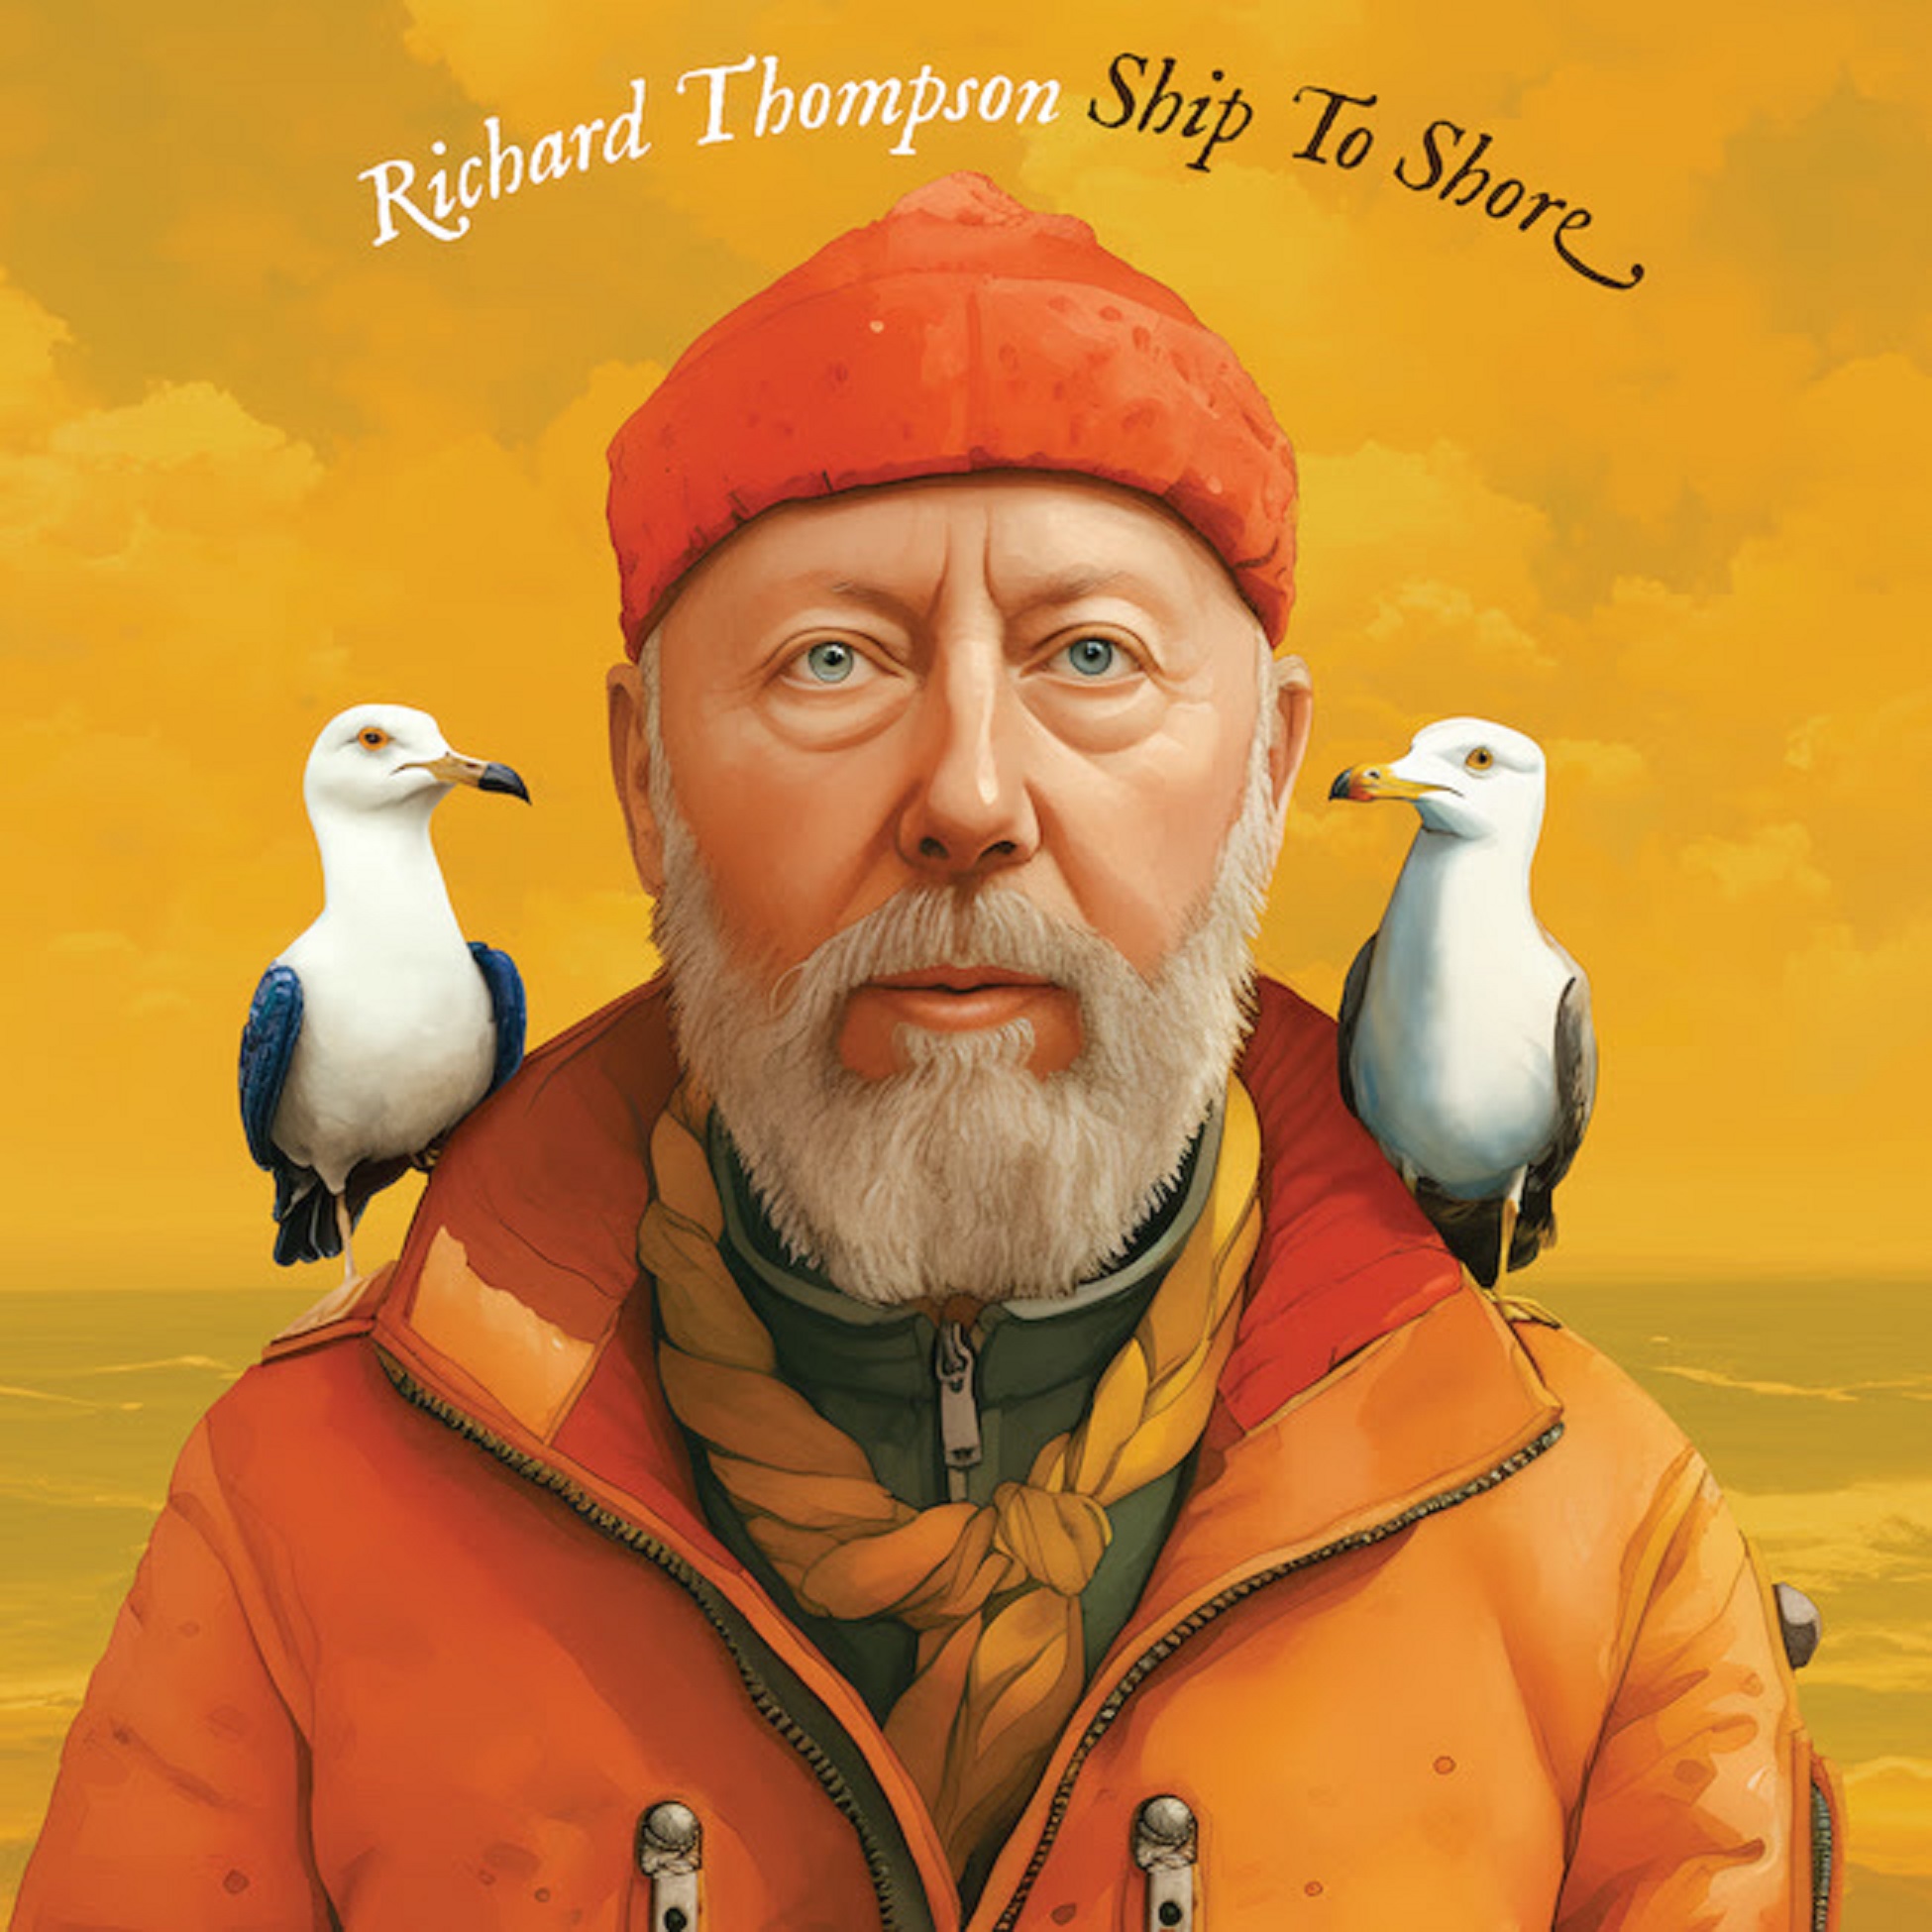 Richard Thompson Returns with "Ship To Shore" Today Via New West Records